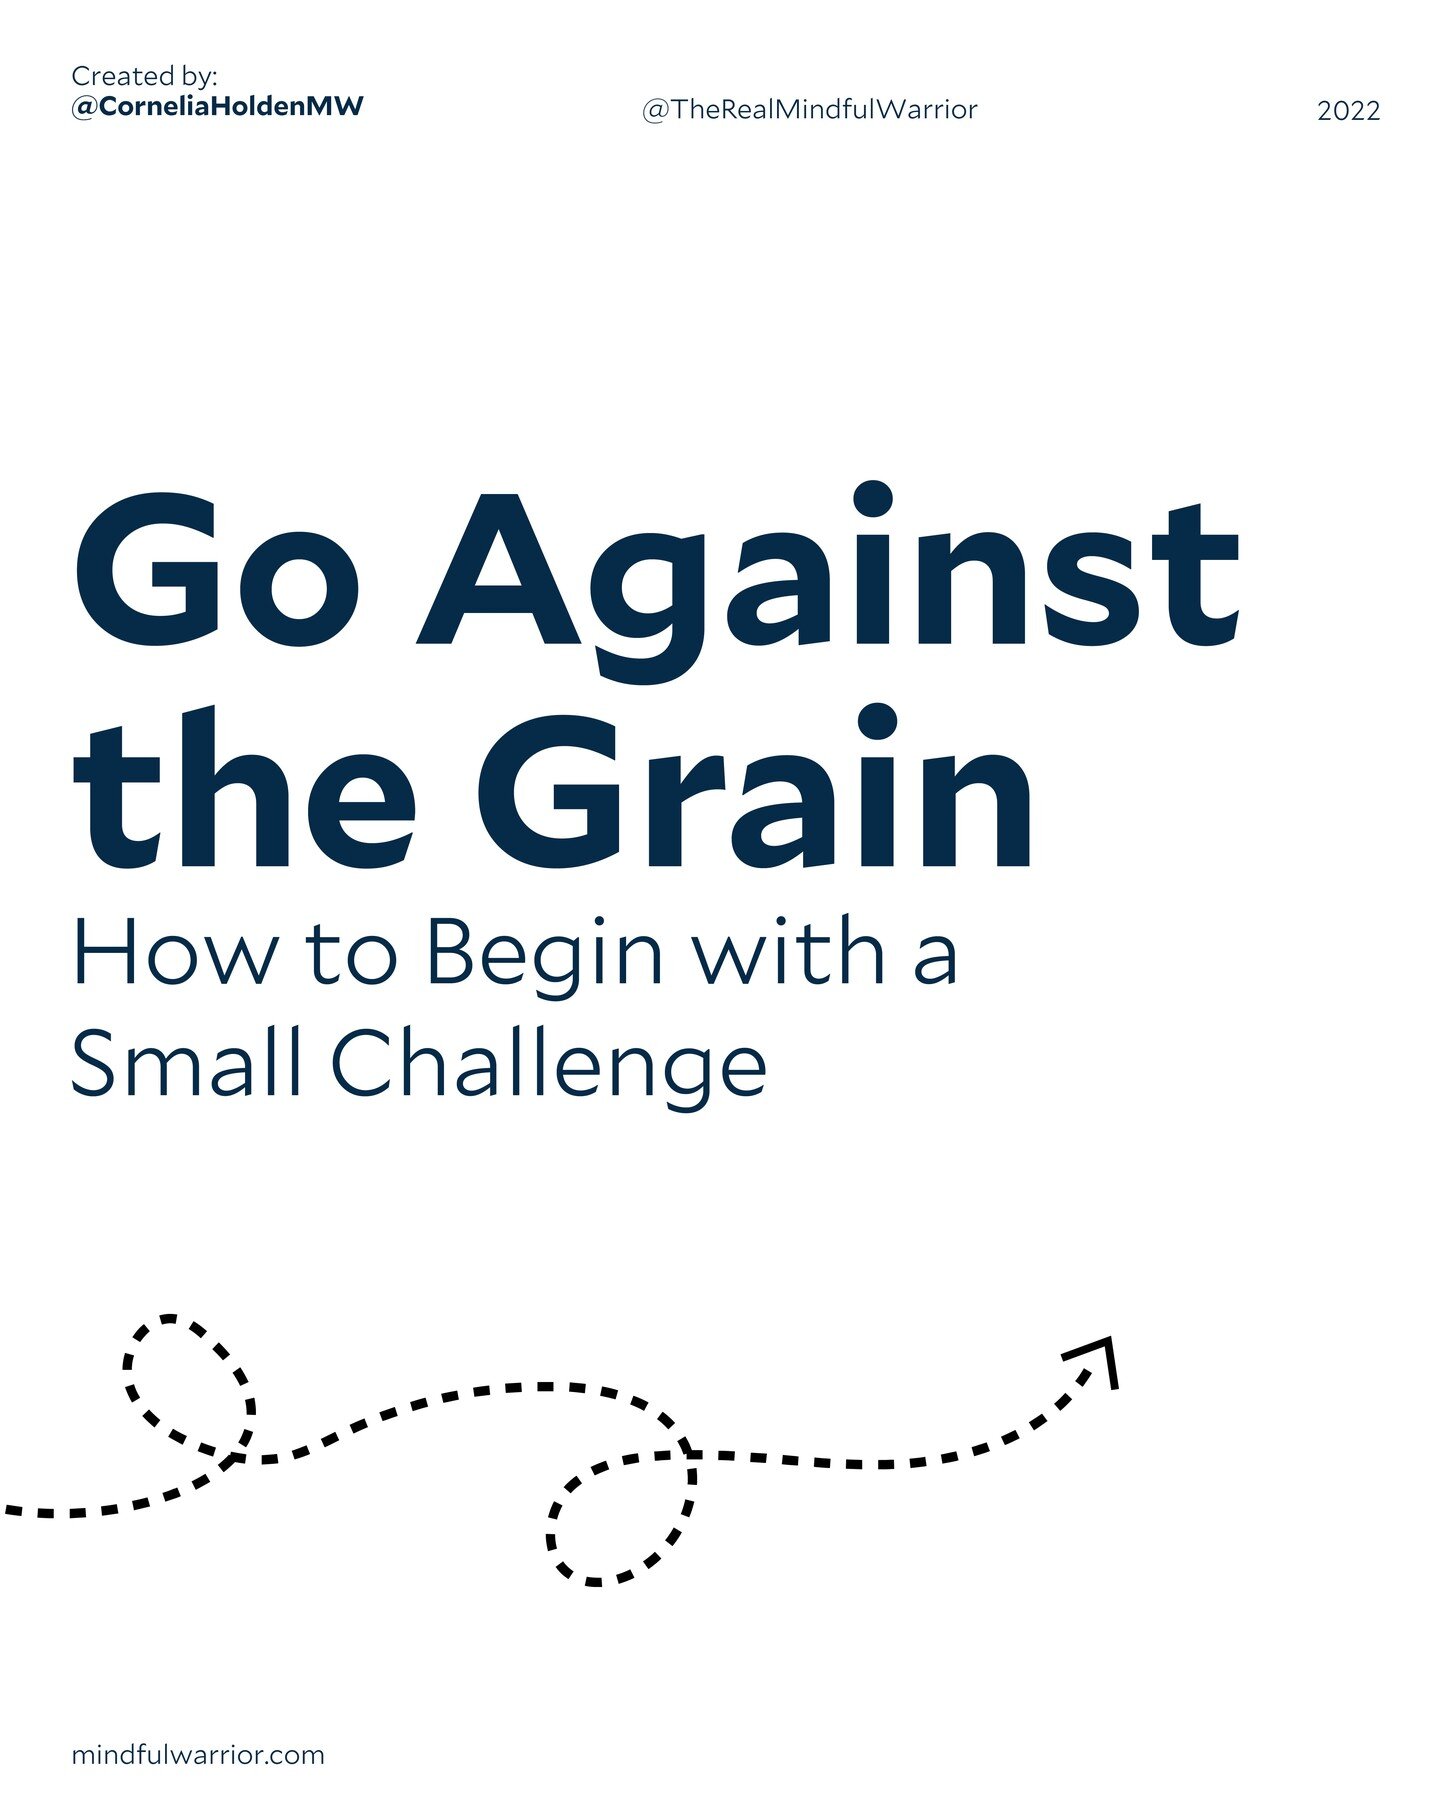 Going against the grain is going against the flow. This means getting outside your comfort zone to speak up for yourself or interrupting a routine with a new challenge. Start small to build the muscle to face bigger challenges! #mindfulwarrior